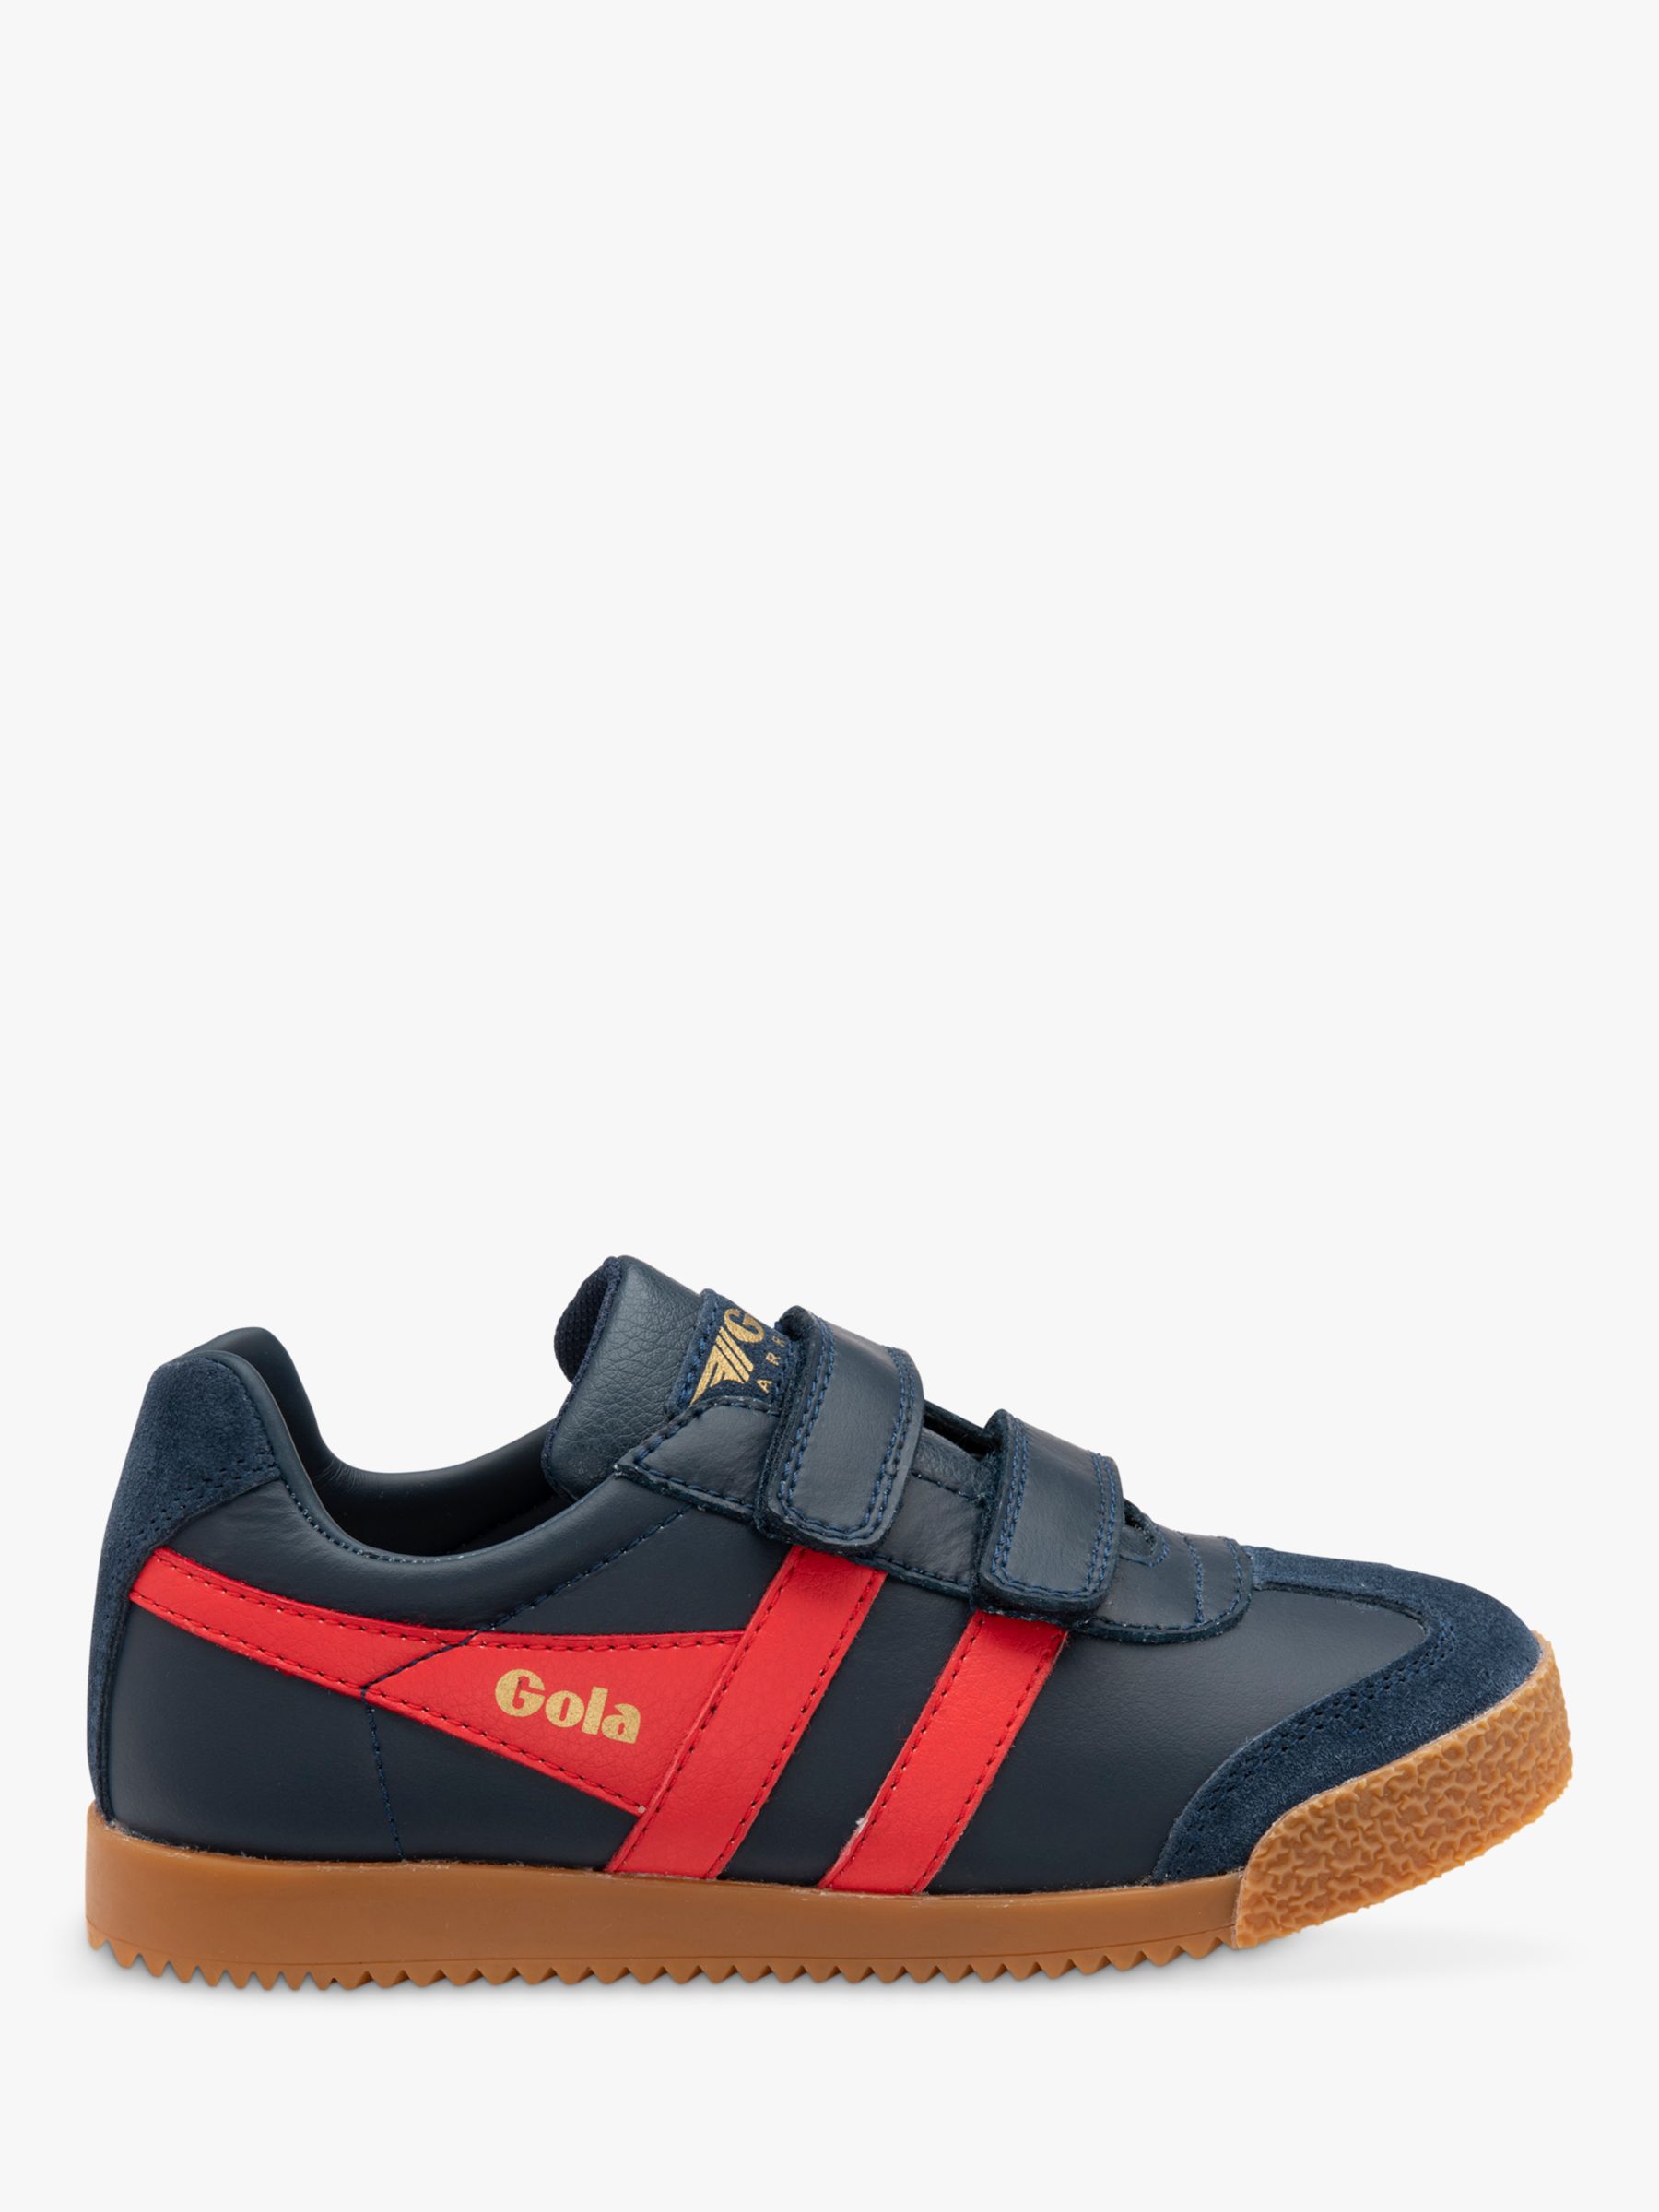 Gola Kids' Classics Harrier Leather Strap Trainers, Navy/Red, 8 Jnr